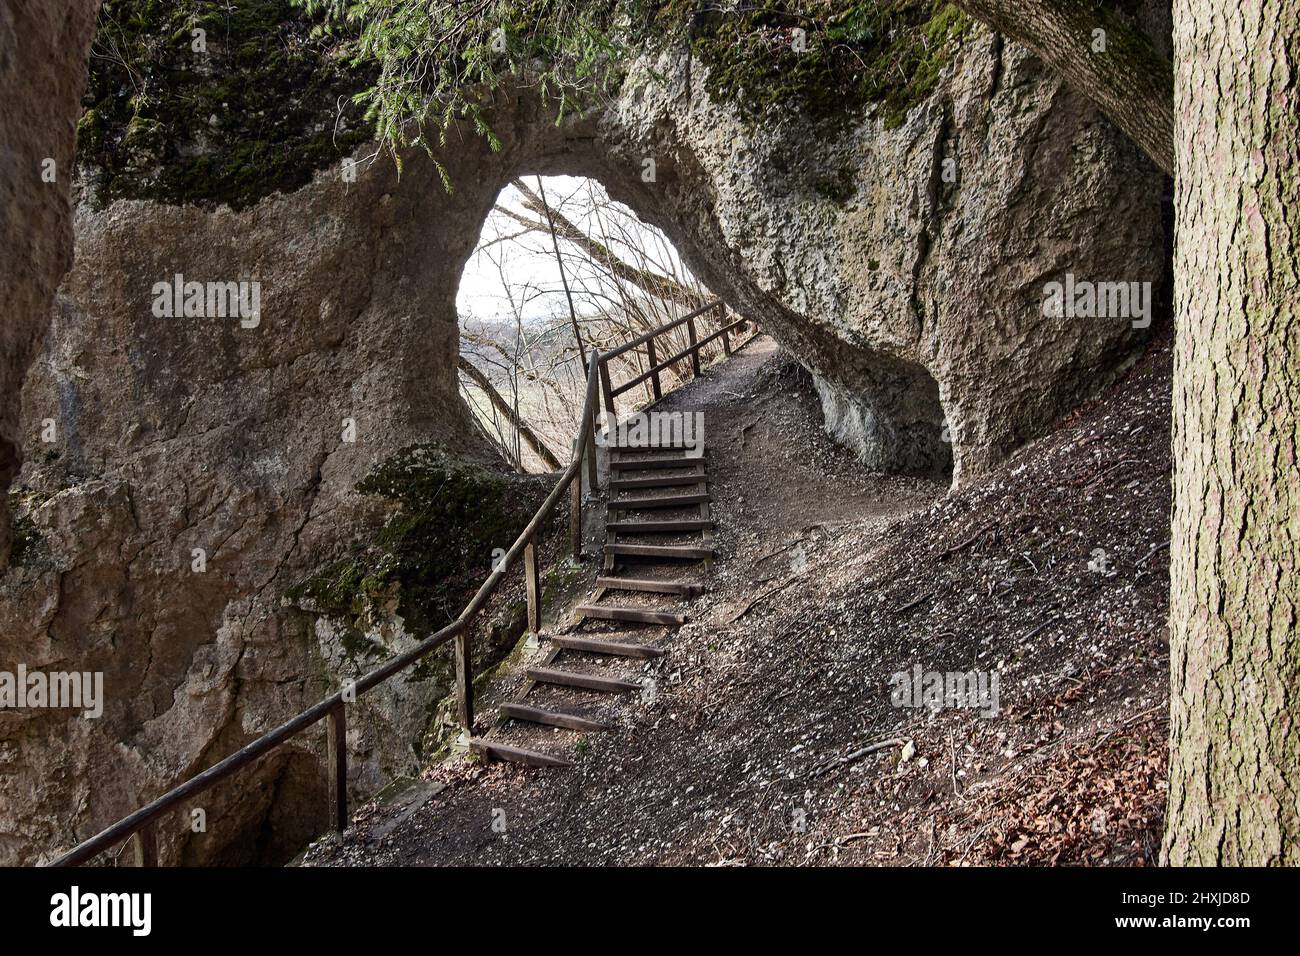 Hiking trail through rock tunnel at Klosterfelsenweg near Inzigkofen Princely Park, Upper Danube Nature Park, Germany Stock Photo